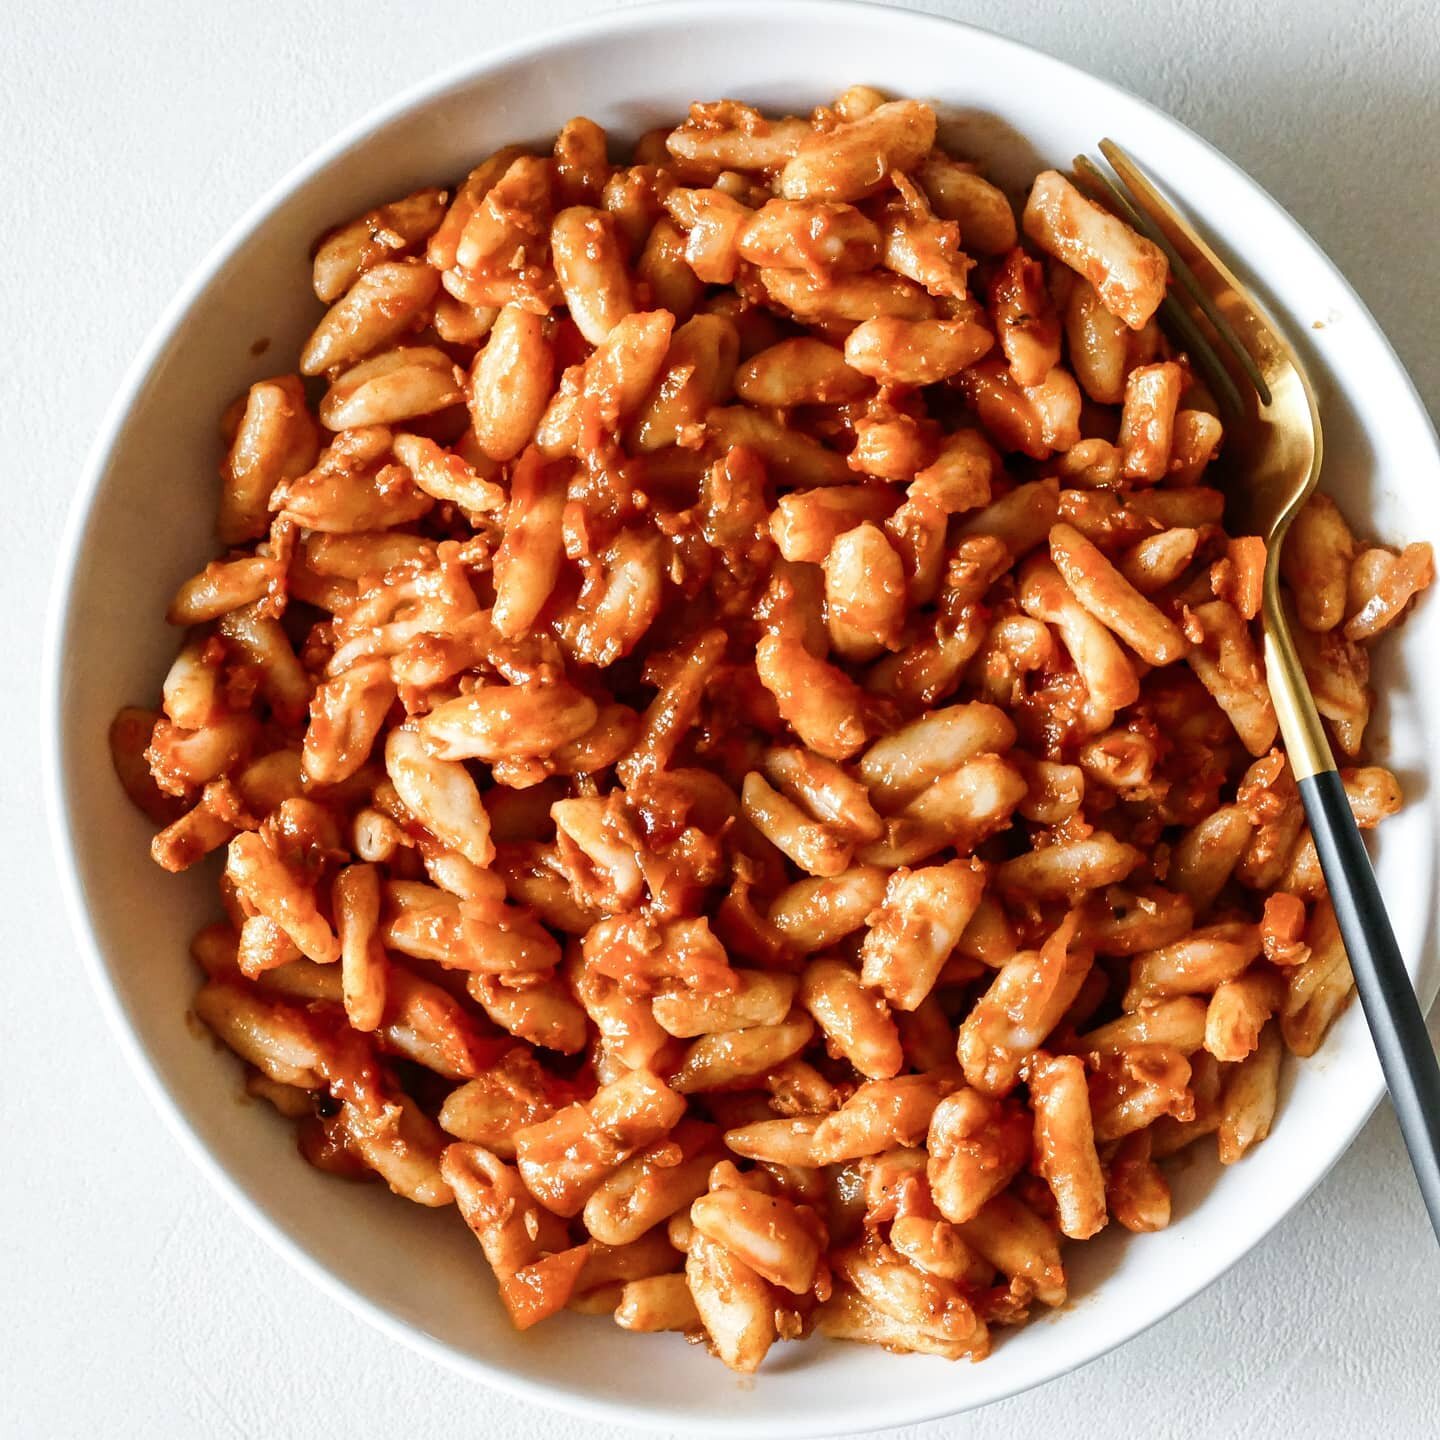 Cavatelli pasta with rag&uacute; - This pasta recipe has been passed down from generation to generation. My grandmother from south of Italy taught me how to make it and today I'm sharing it with you.
You can find the full recipe on my website. I've t